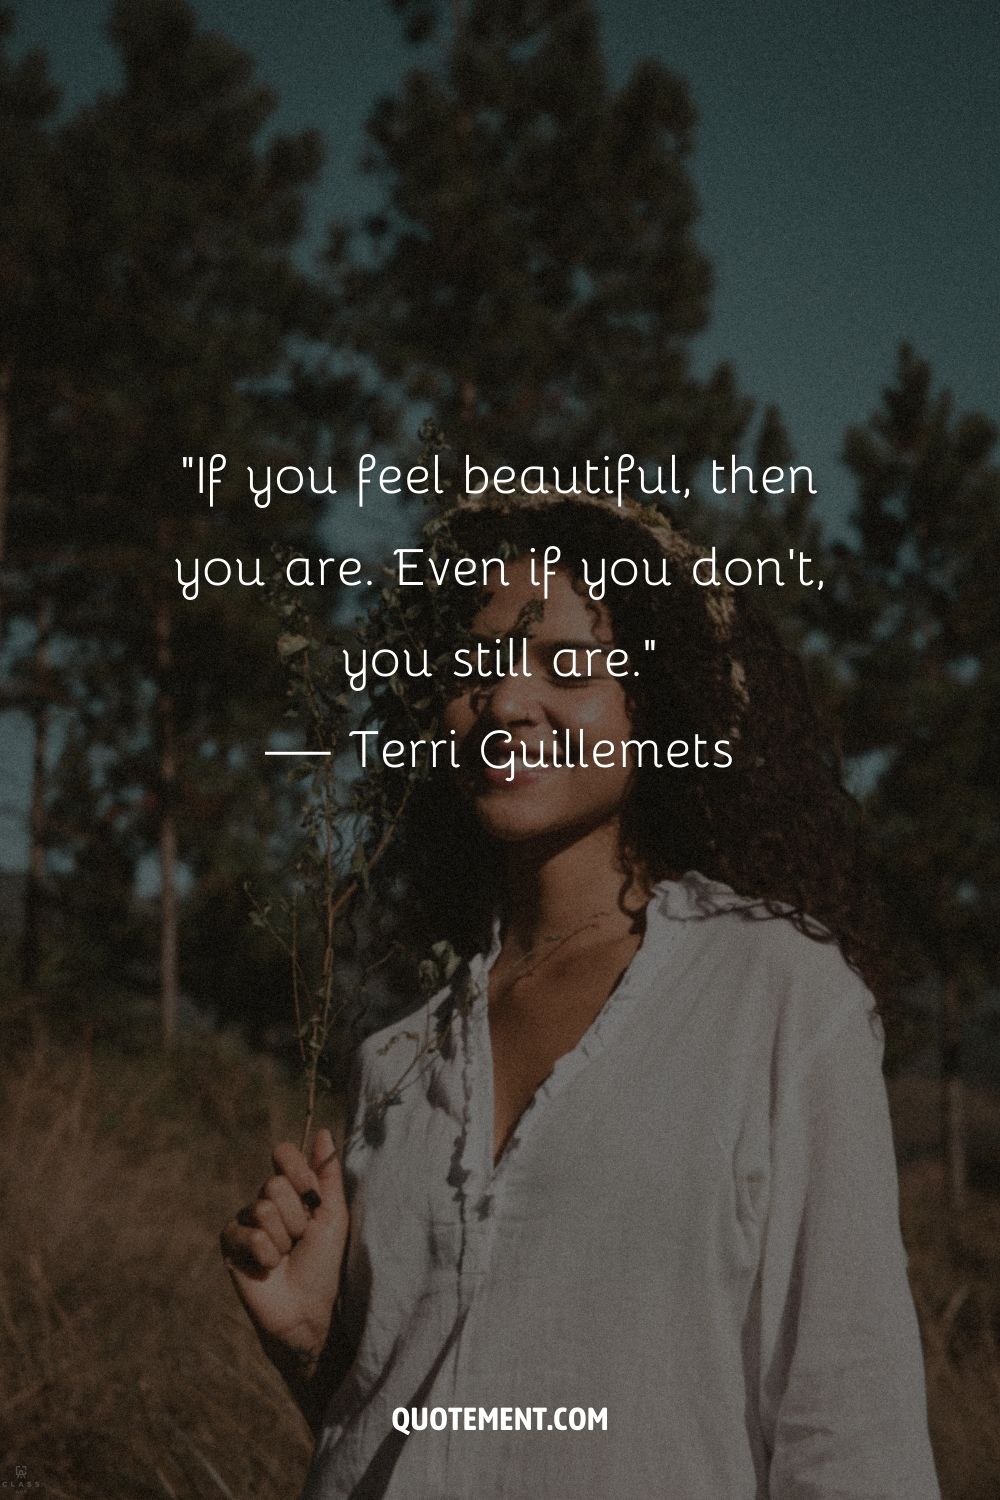 If you feel beautiful, then you are. Even if you don't, you still are. — Terri Guillemets